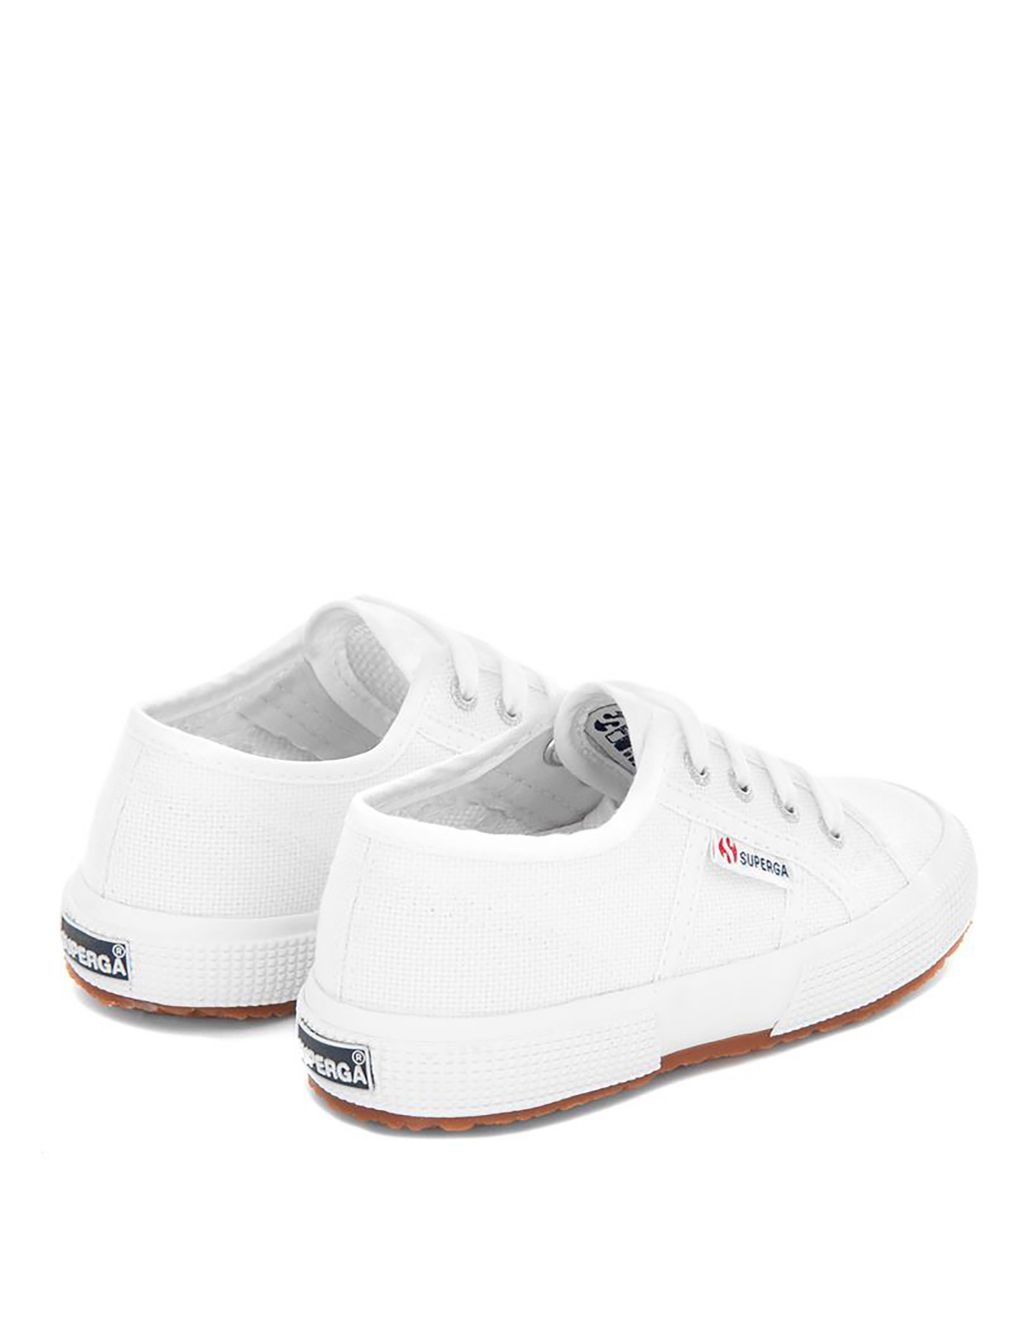 Kids' 2750 Jcot Classic Lace Up Trainers ( 10 Small - 3.5 Large) image 3